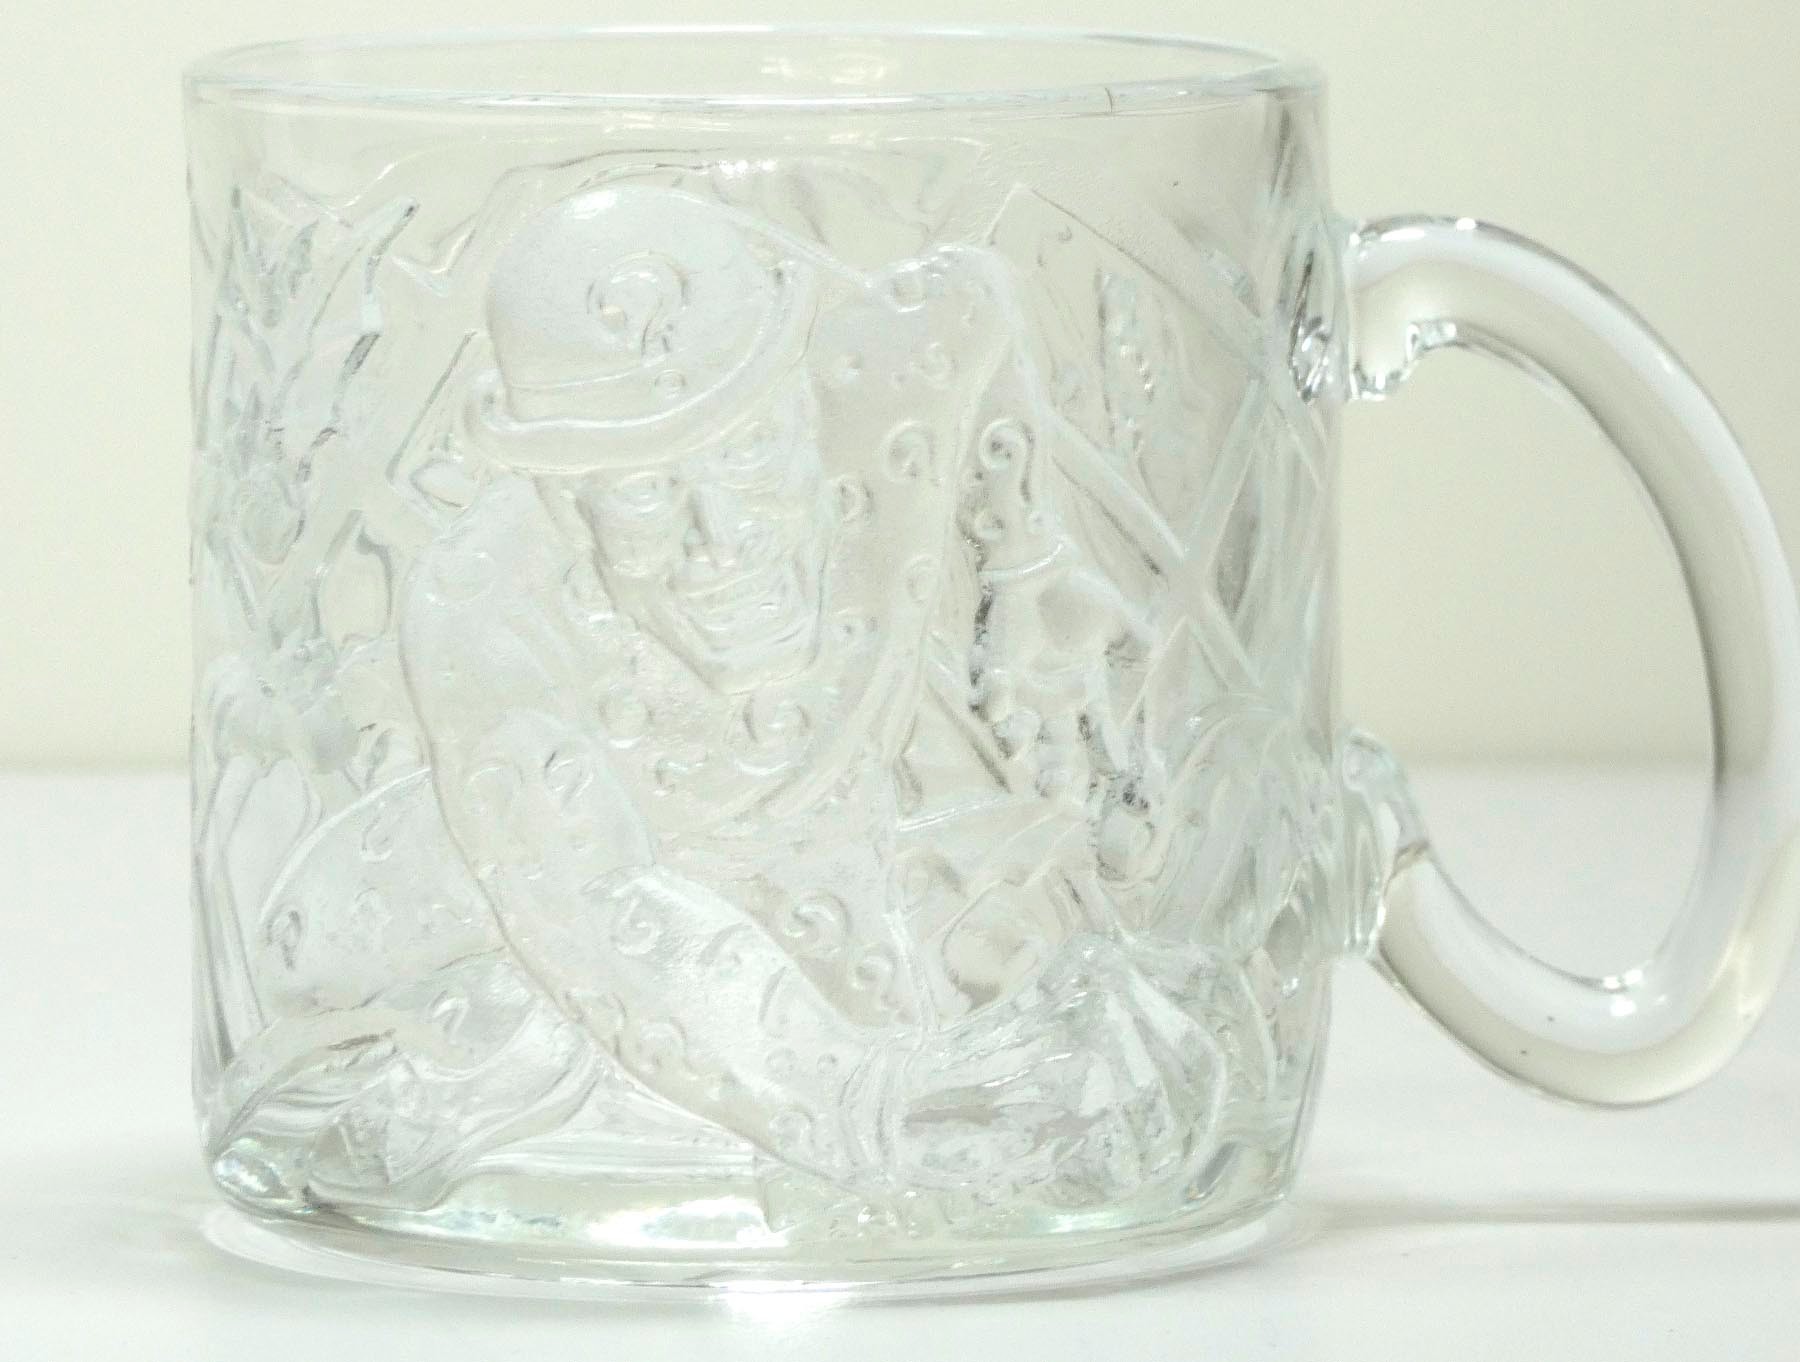 A set of four Batman Forever (1995) glass mugs, available to purchase from McDonalds stores to - Image 7 of 13